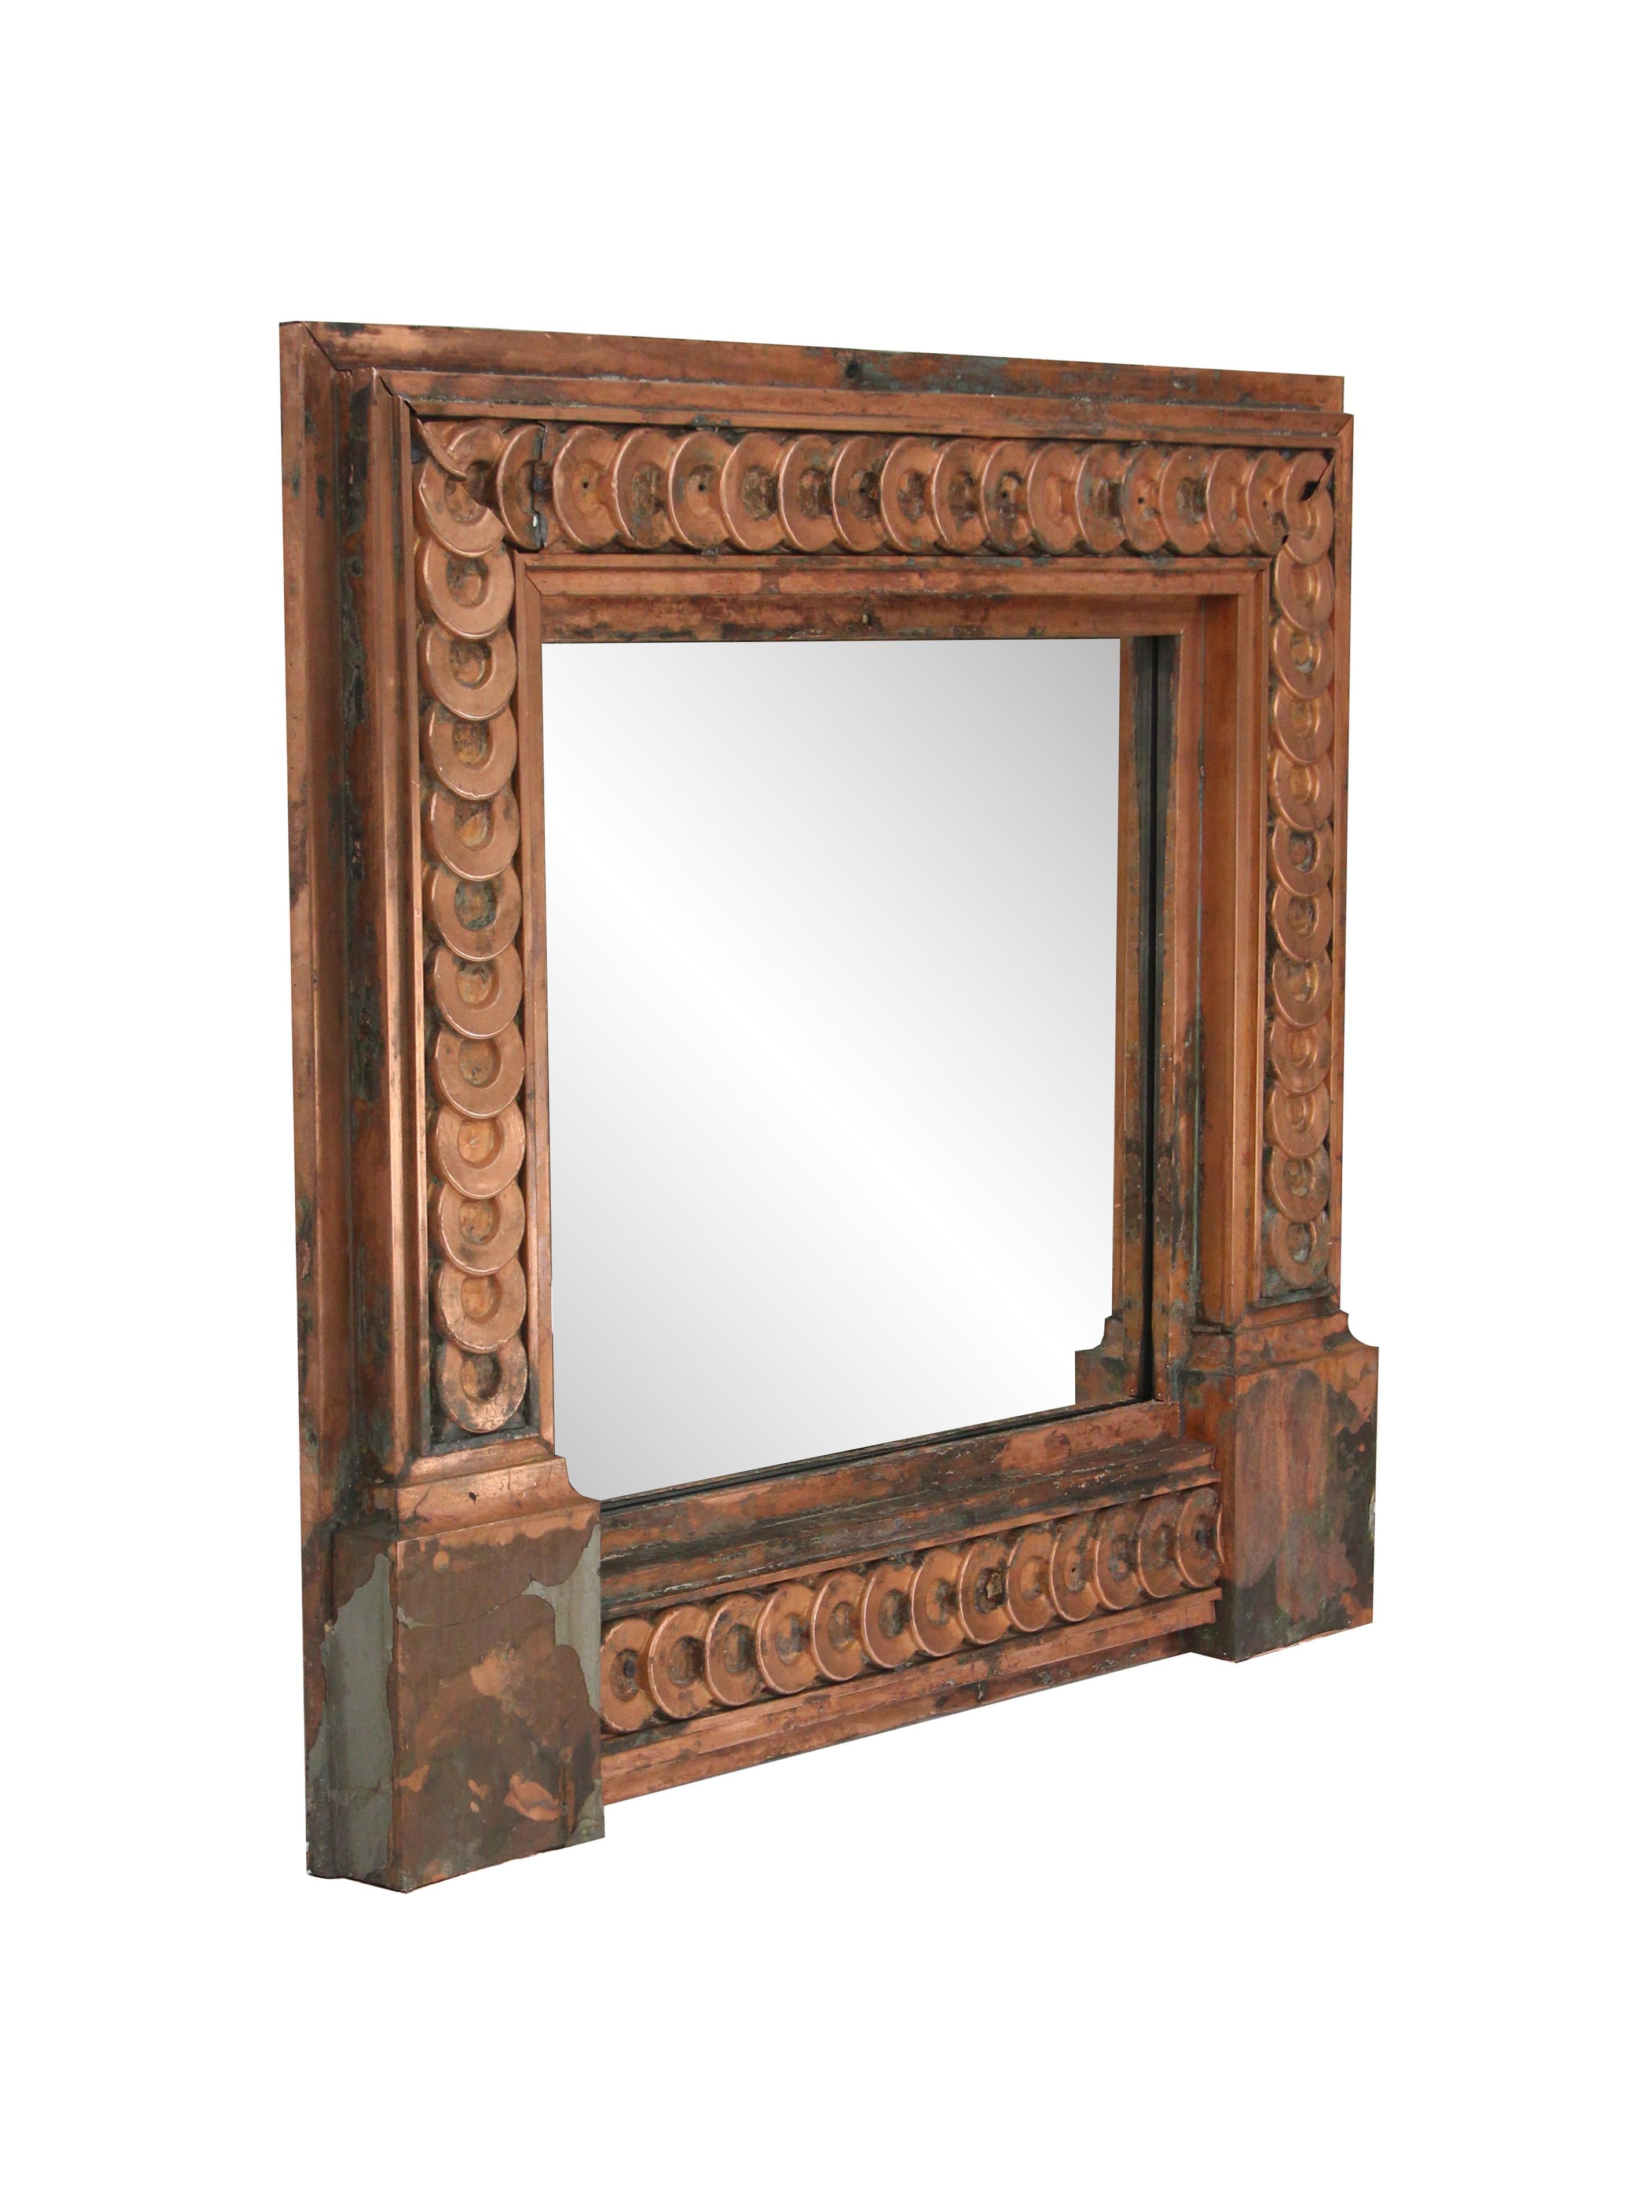 Made from the recovered copper building facade of a 1900s NYC building. New mirror and wood frame. This can be seen at our 400 Gilligan St location in Scranton, PA.